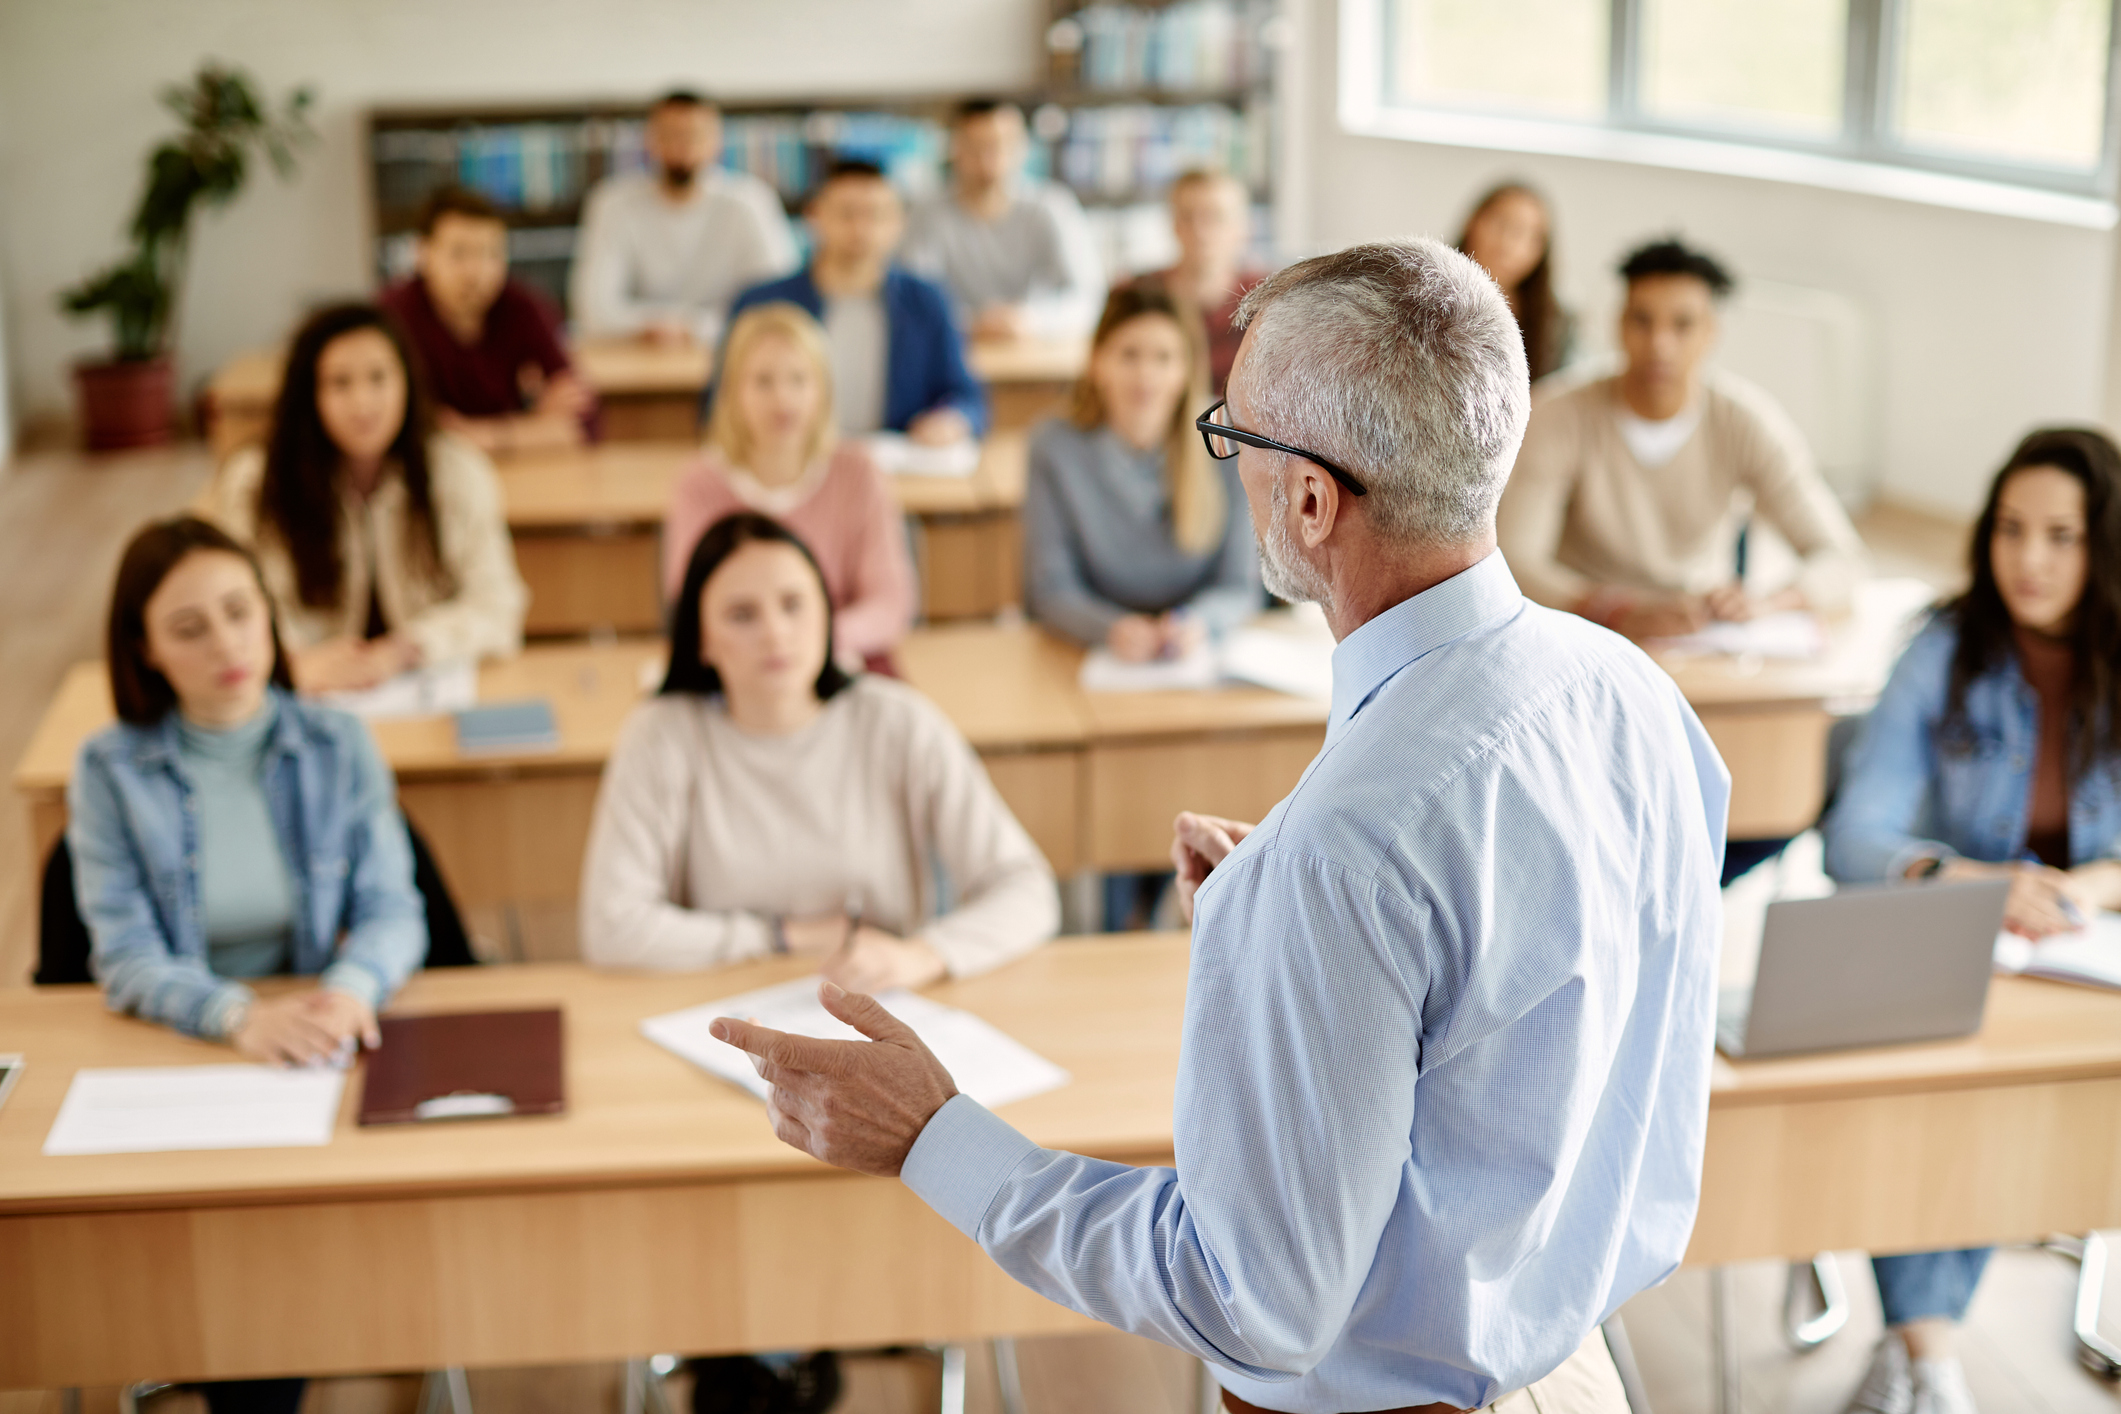 A man with white hair and a light blue shirt stands and speaks in front of a class of young adults seated at rows of wooden desks. Earn your adult education certificate online from the University of San Diego.